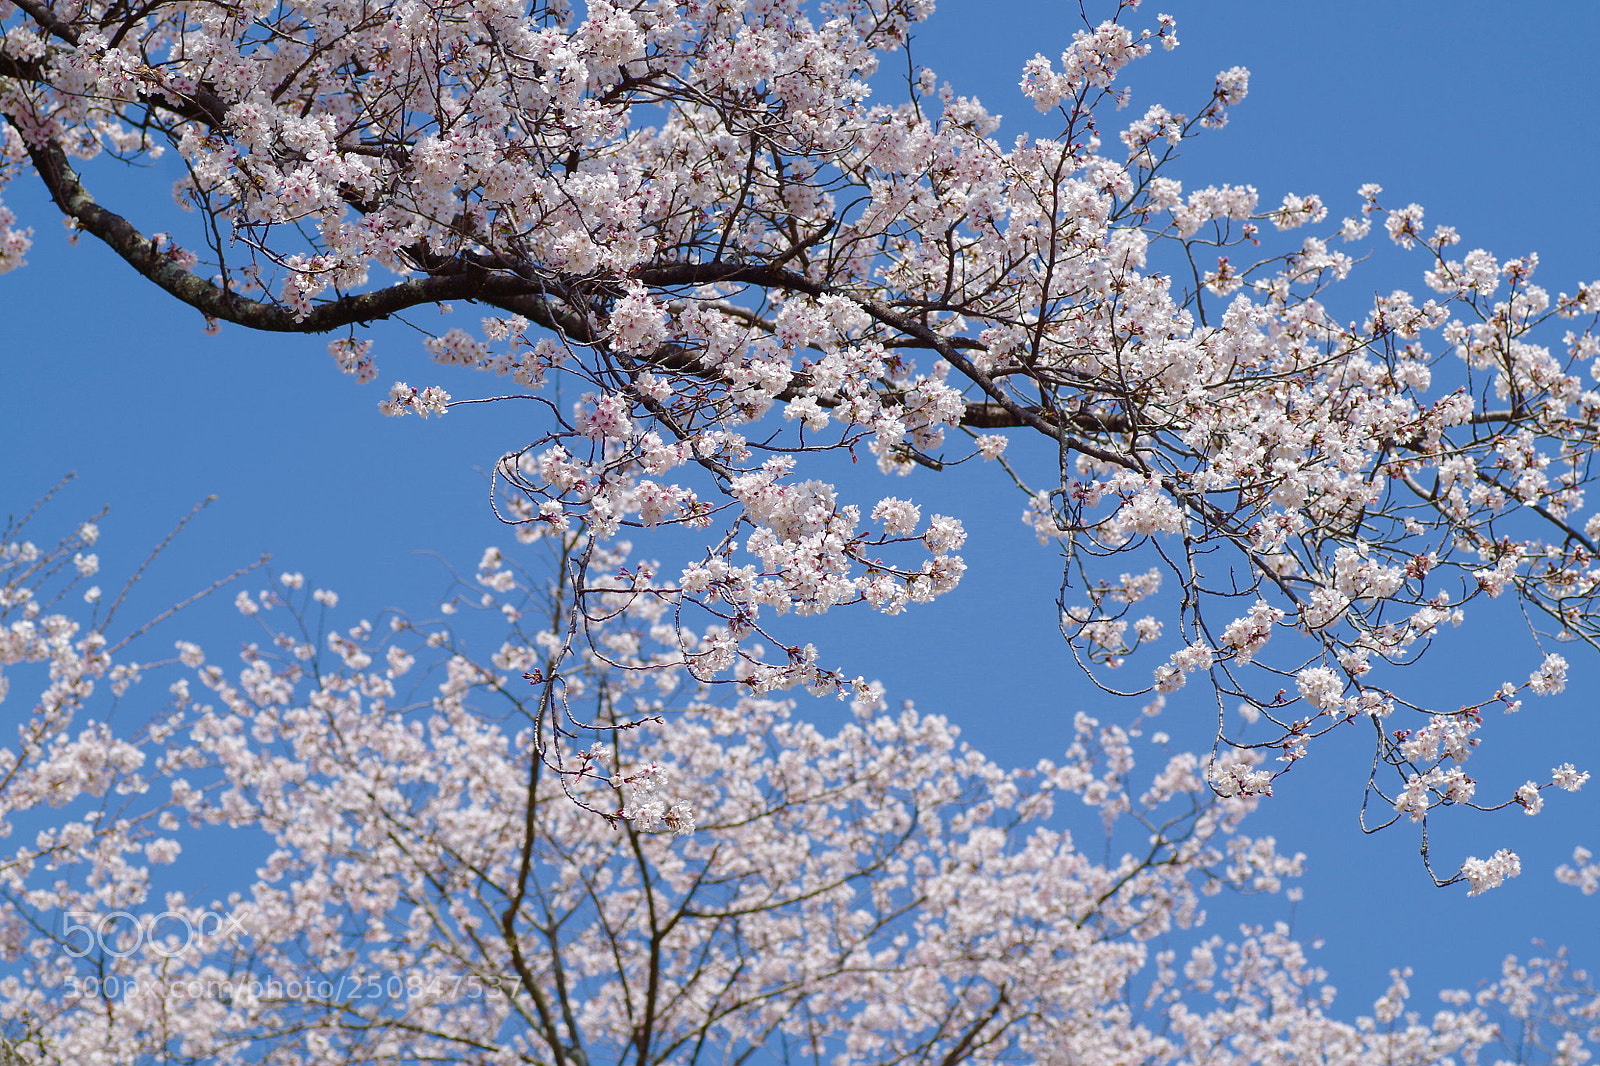 Pentax K-30 sample photo. Cherry blossoms in the photography